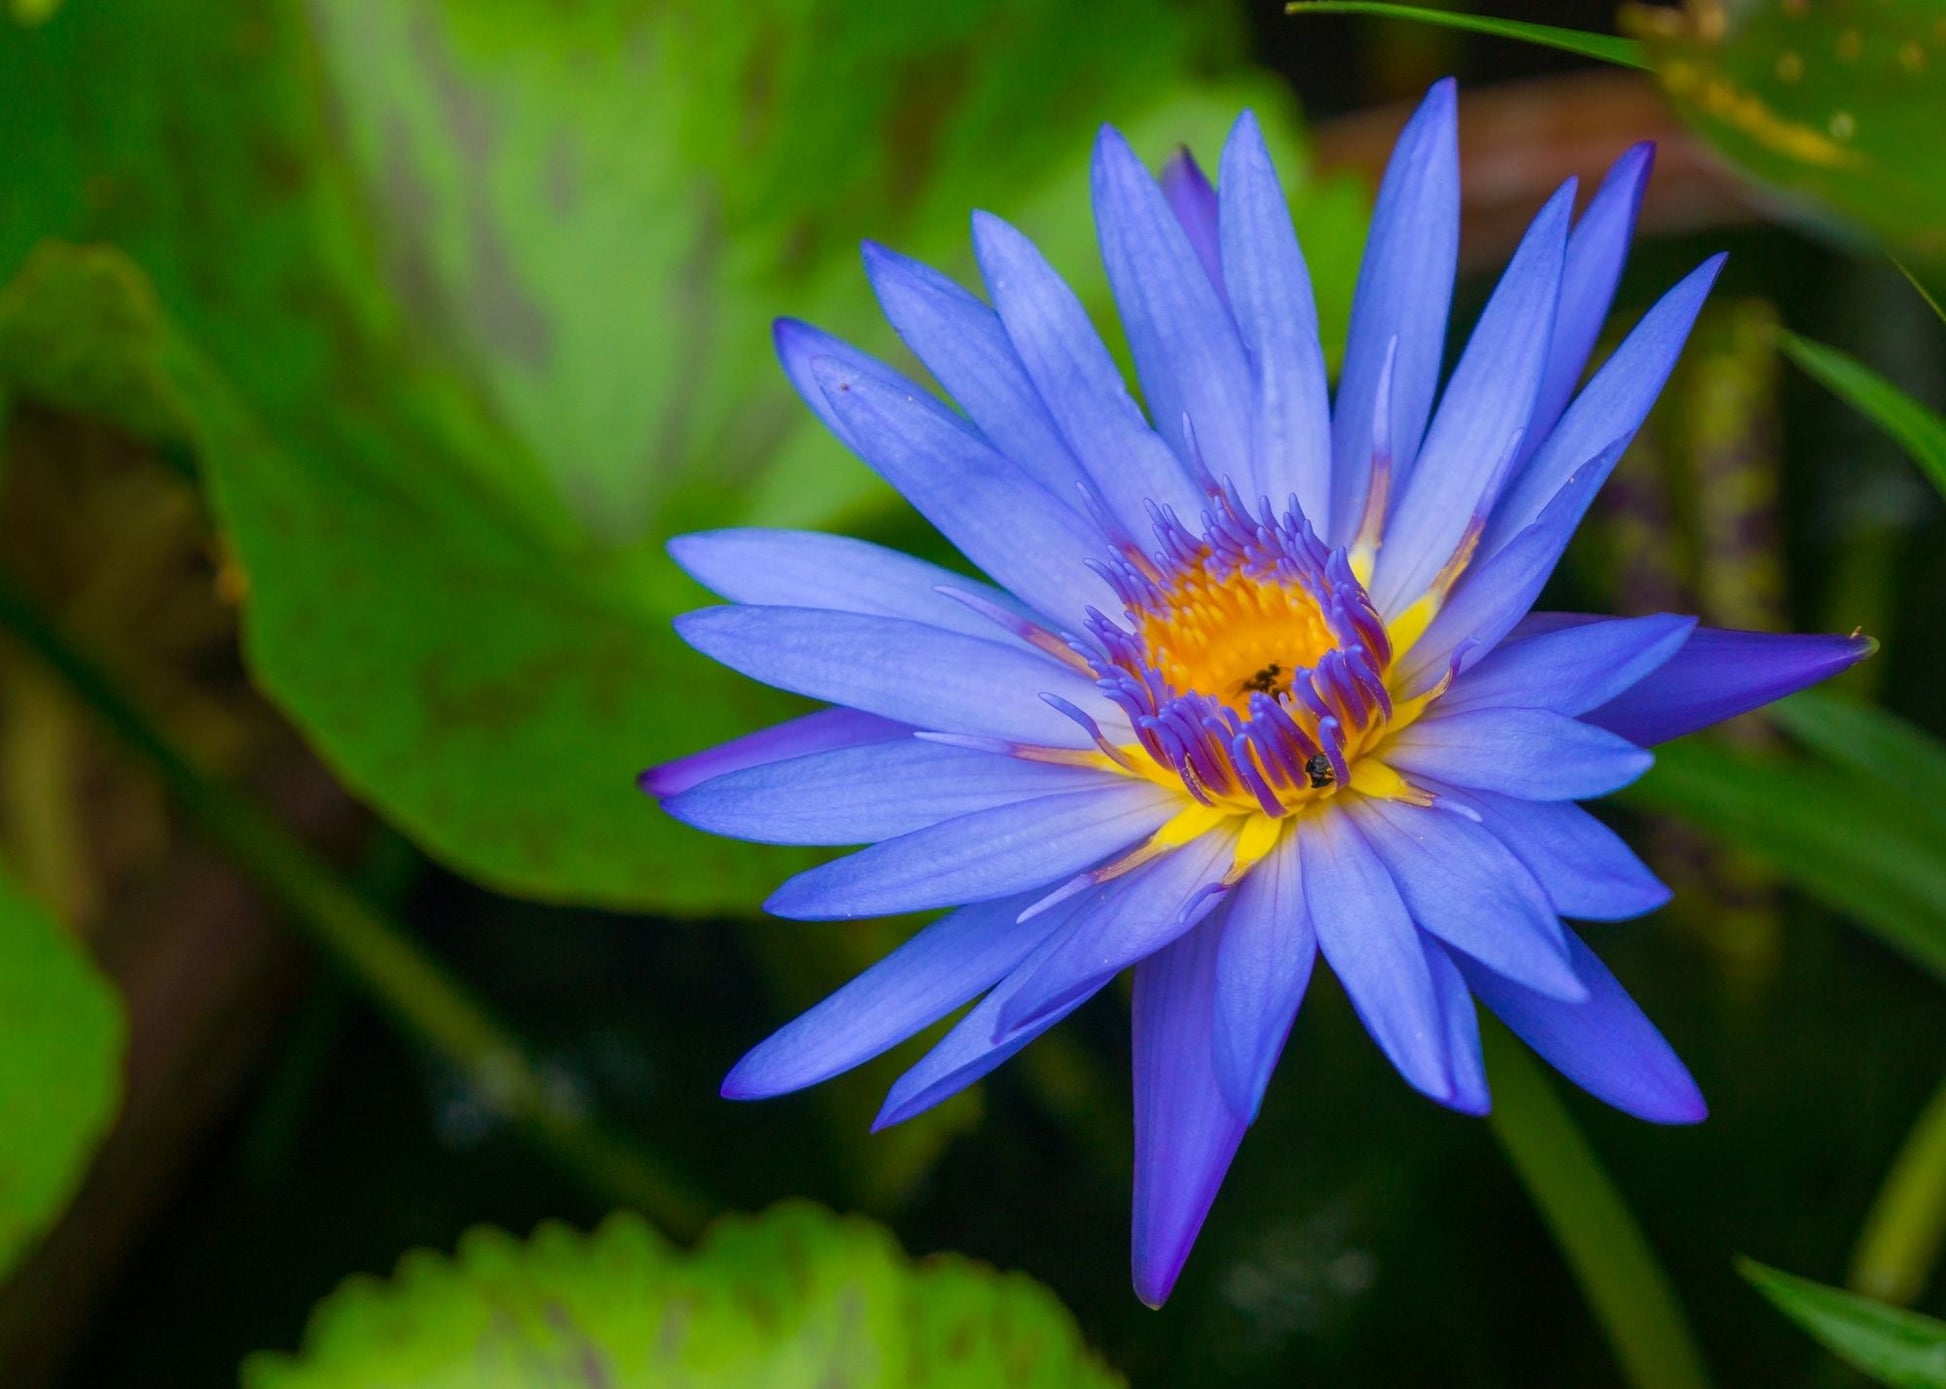 Blue Lotus has been respected as an ancestral flower known to induce deep meditative energy, enhance third eye function and motivate lucid dreaming.